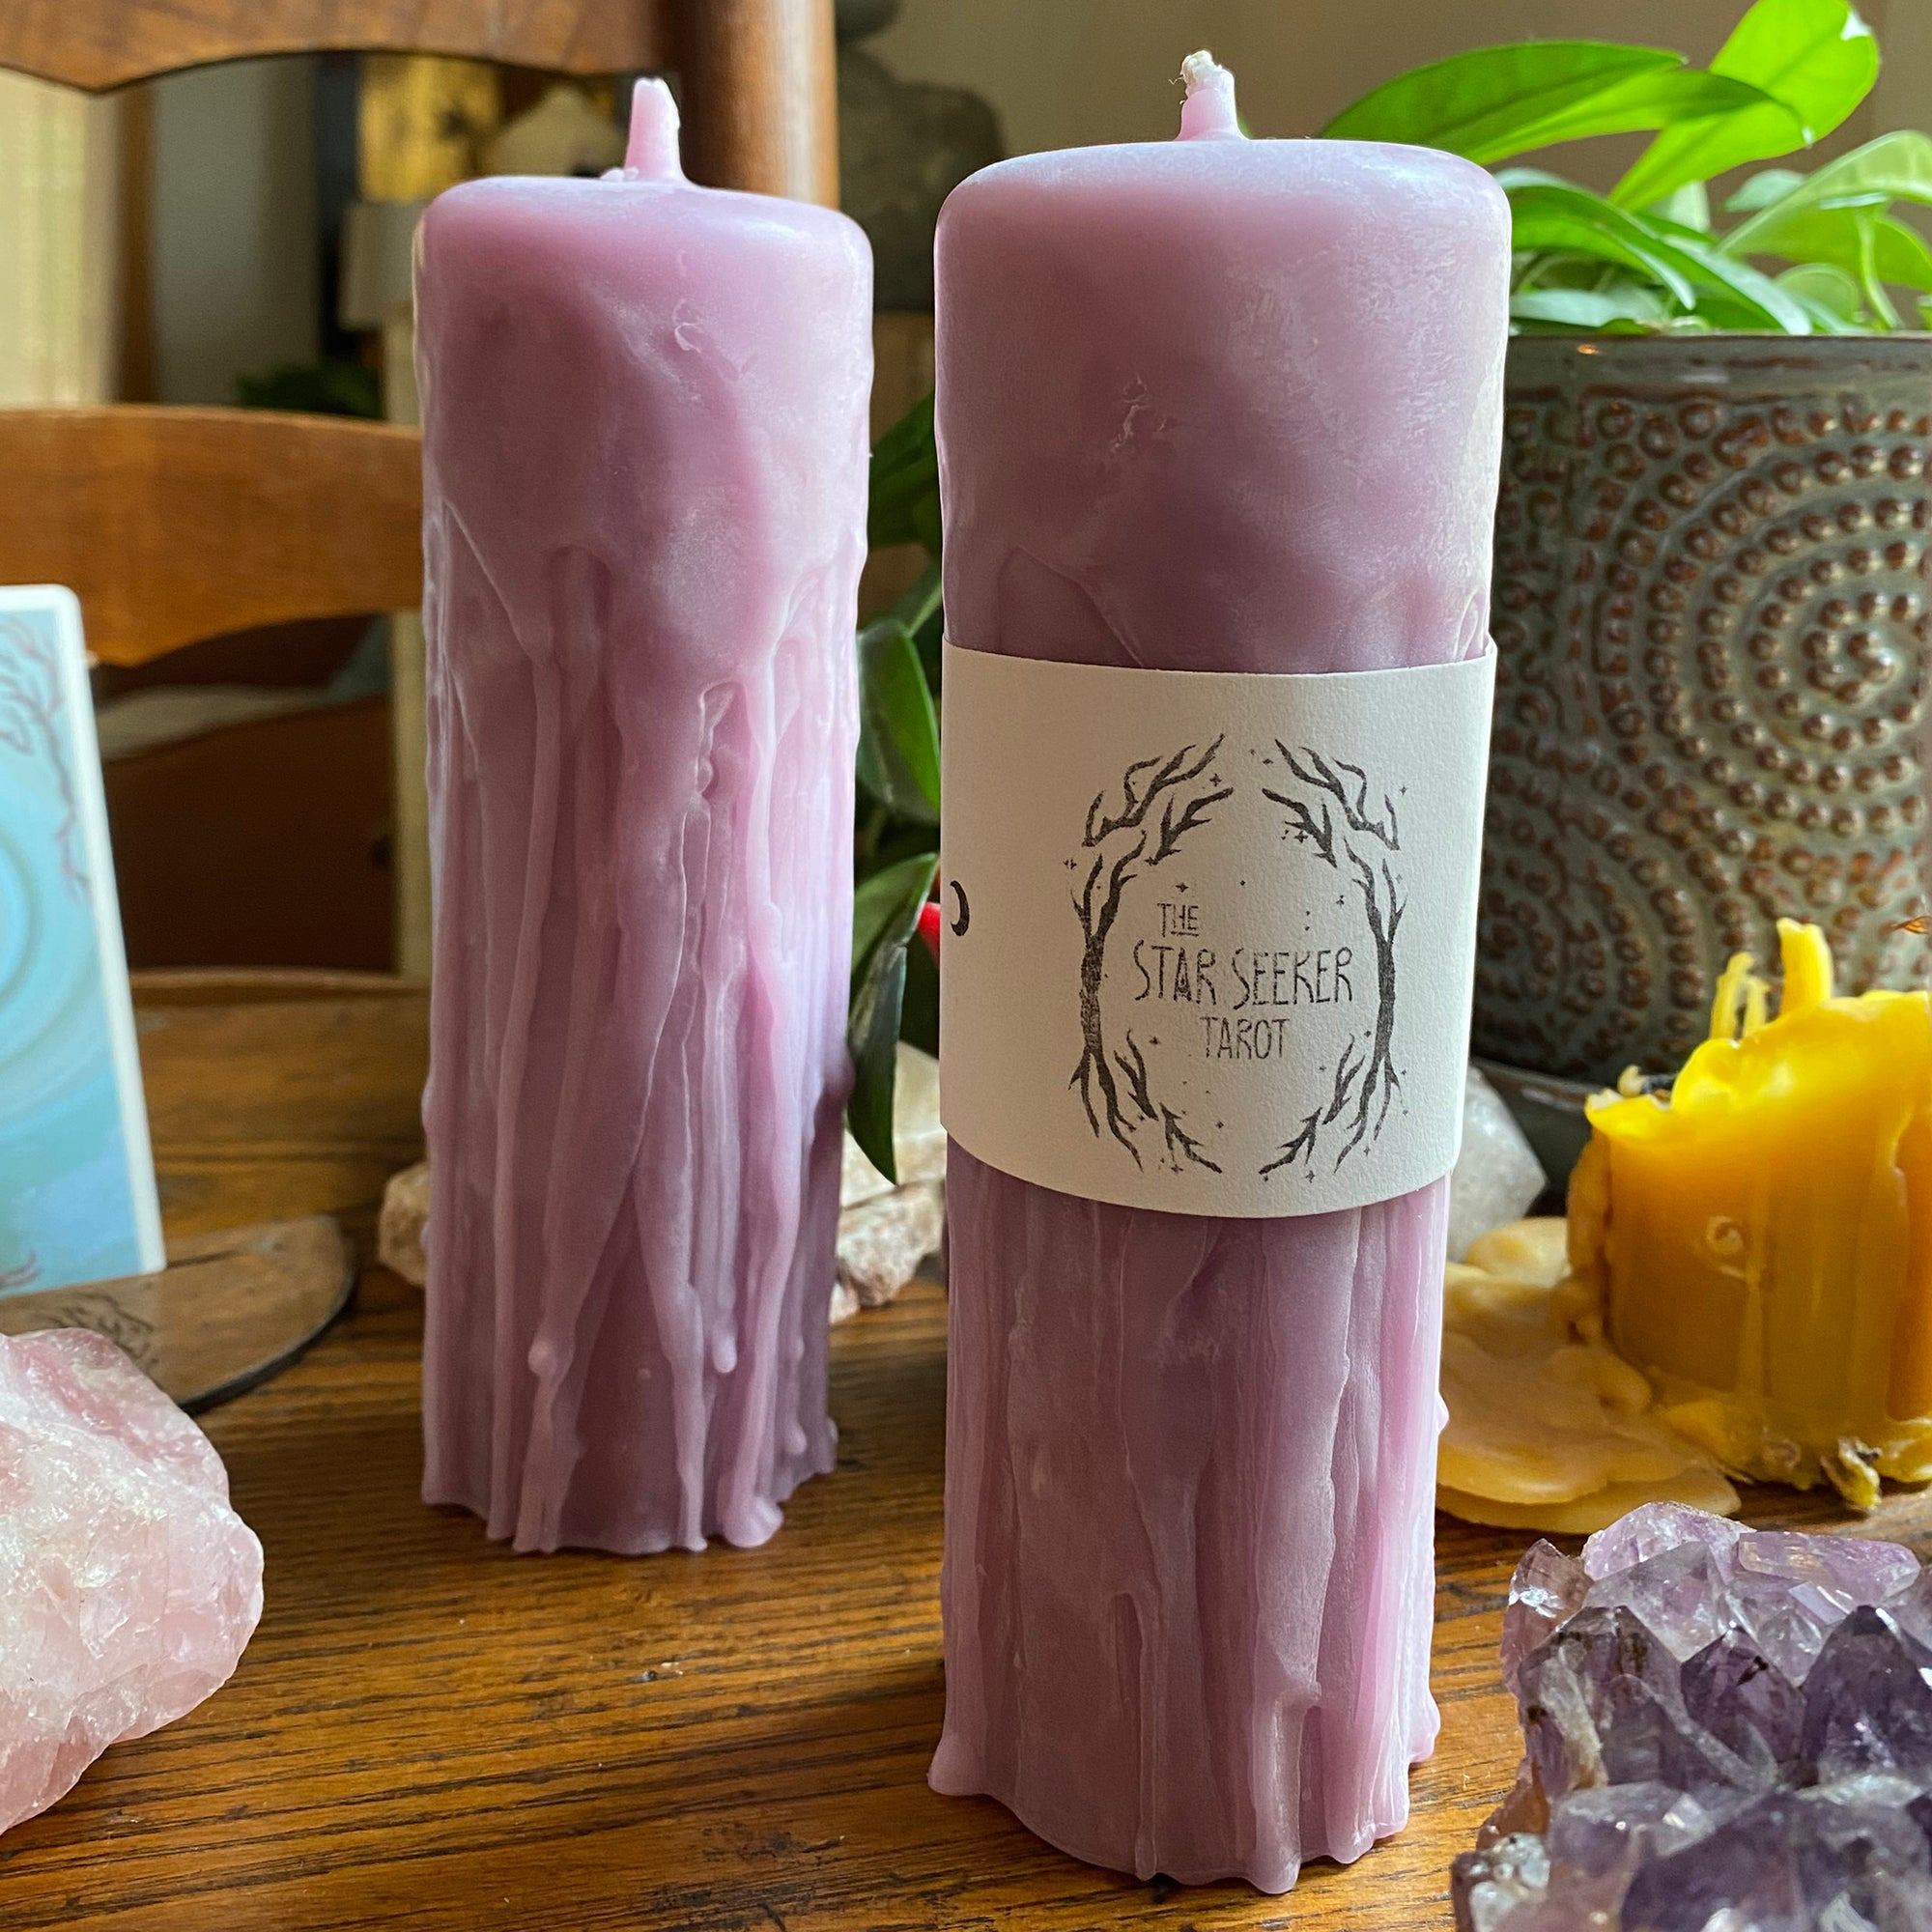 Star Seeker Tarot x Mithras Dusty Rose Dripped Candle 6.5"